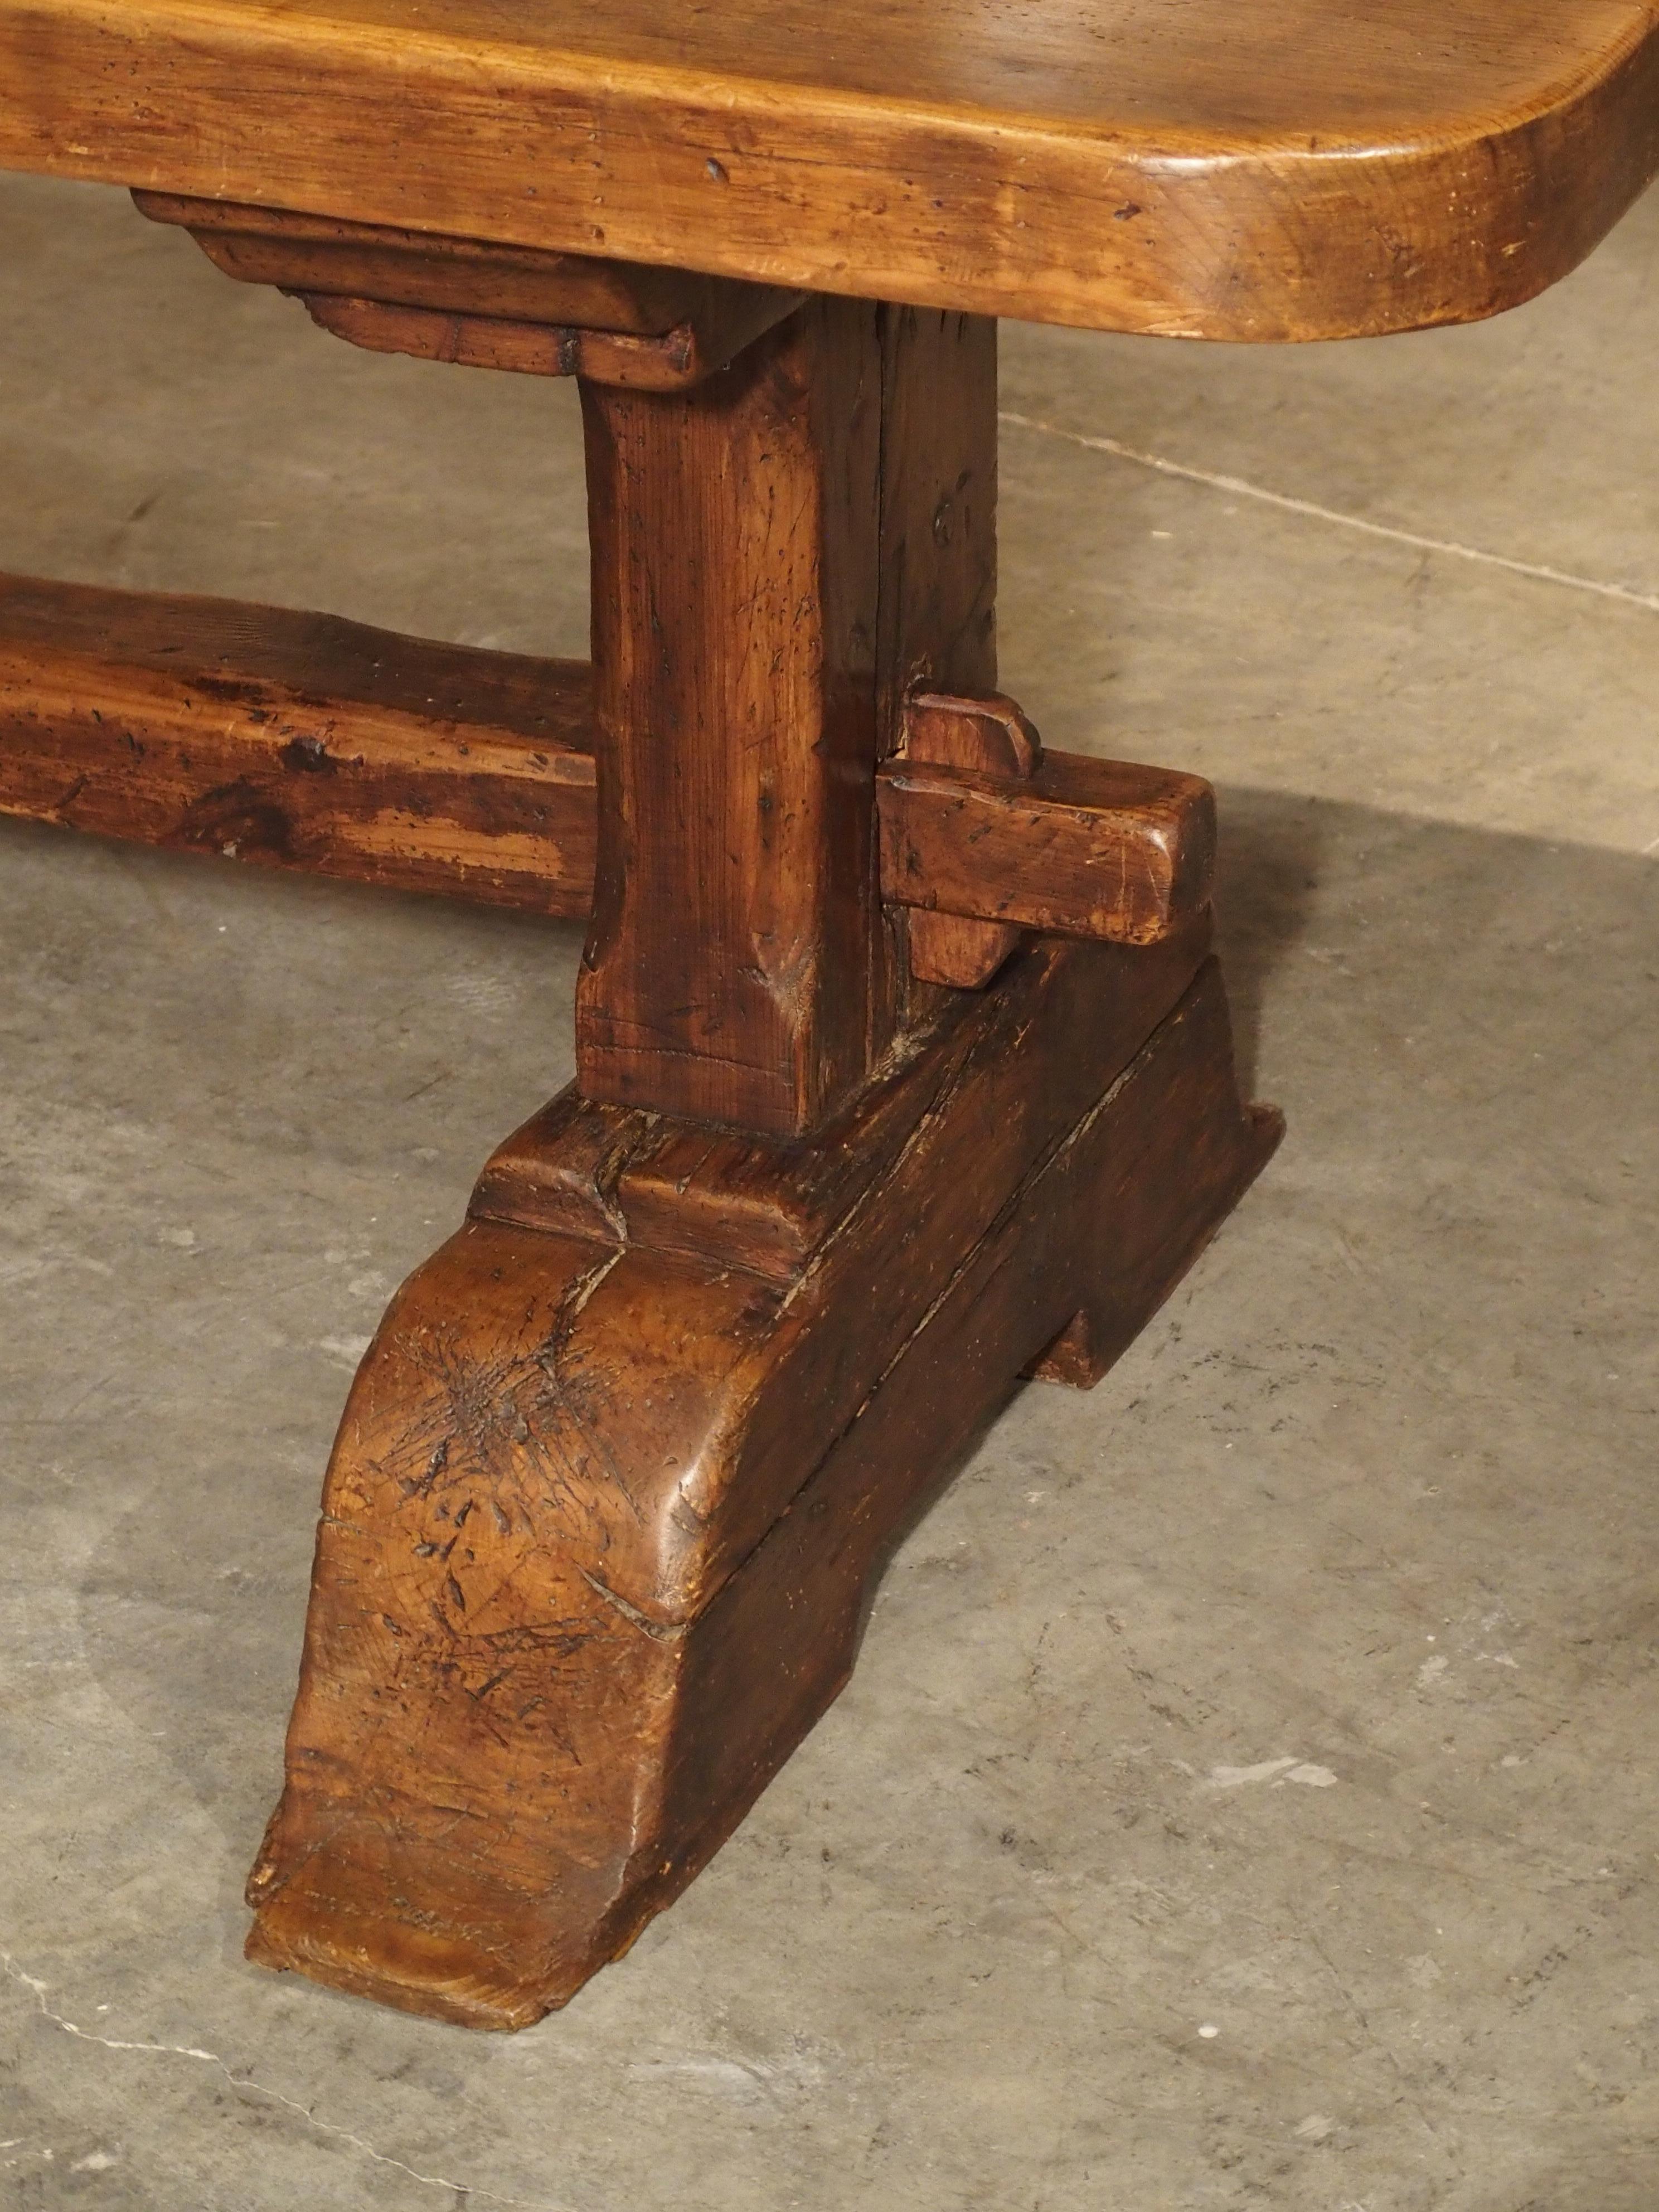 French 18th Century Single Plank Monastery Table from La Savoie, France